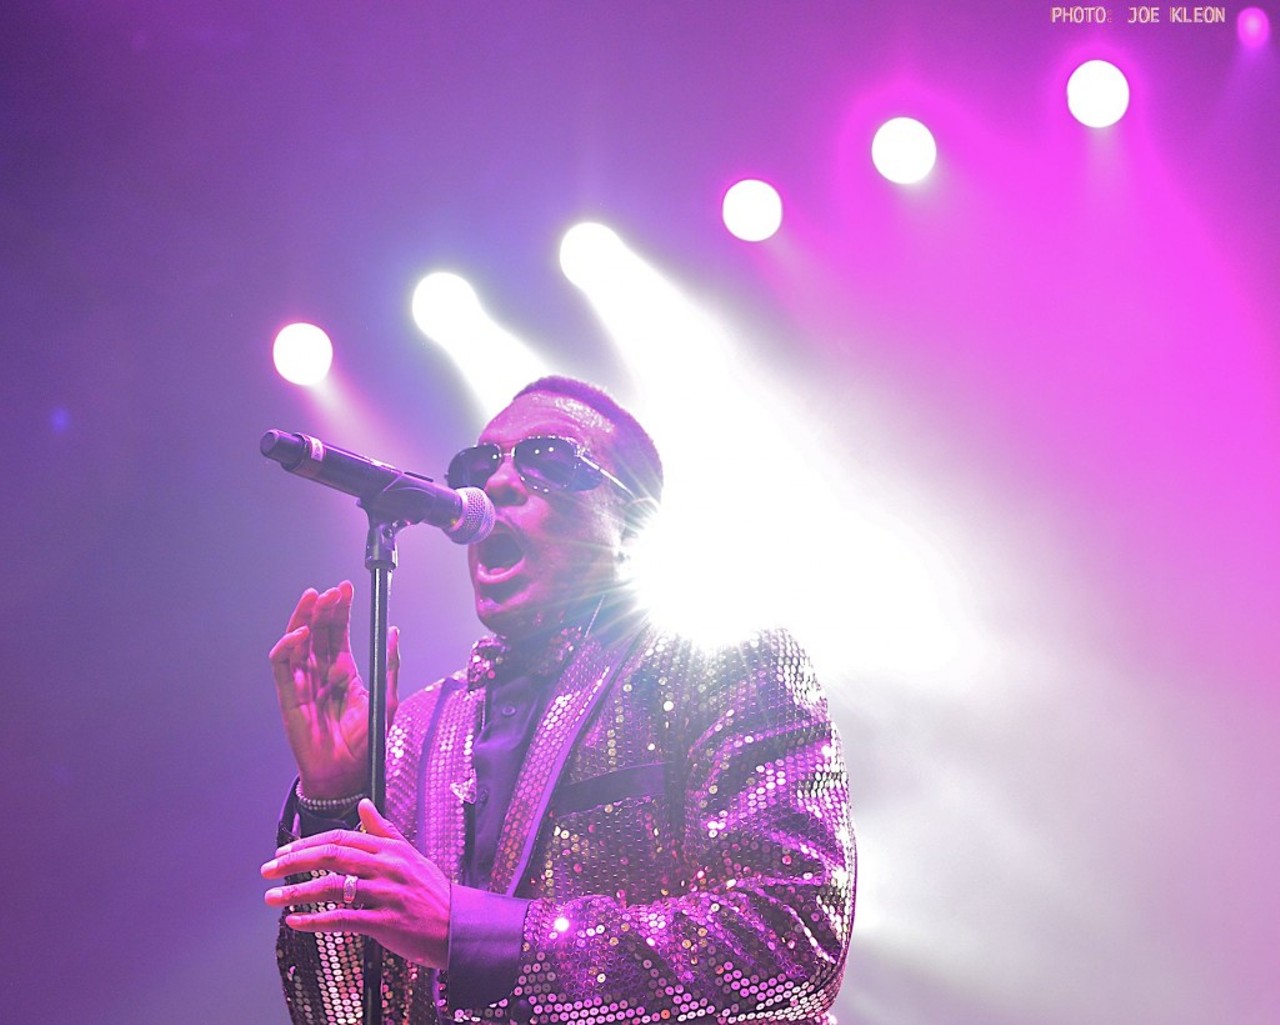 Charlie Wilson and Kem Performing at the Wolstein Center